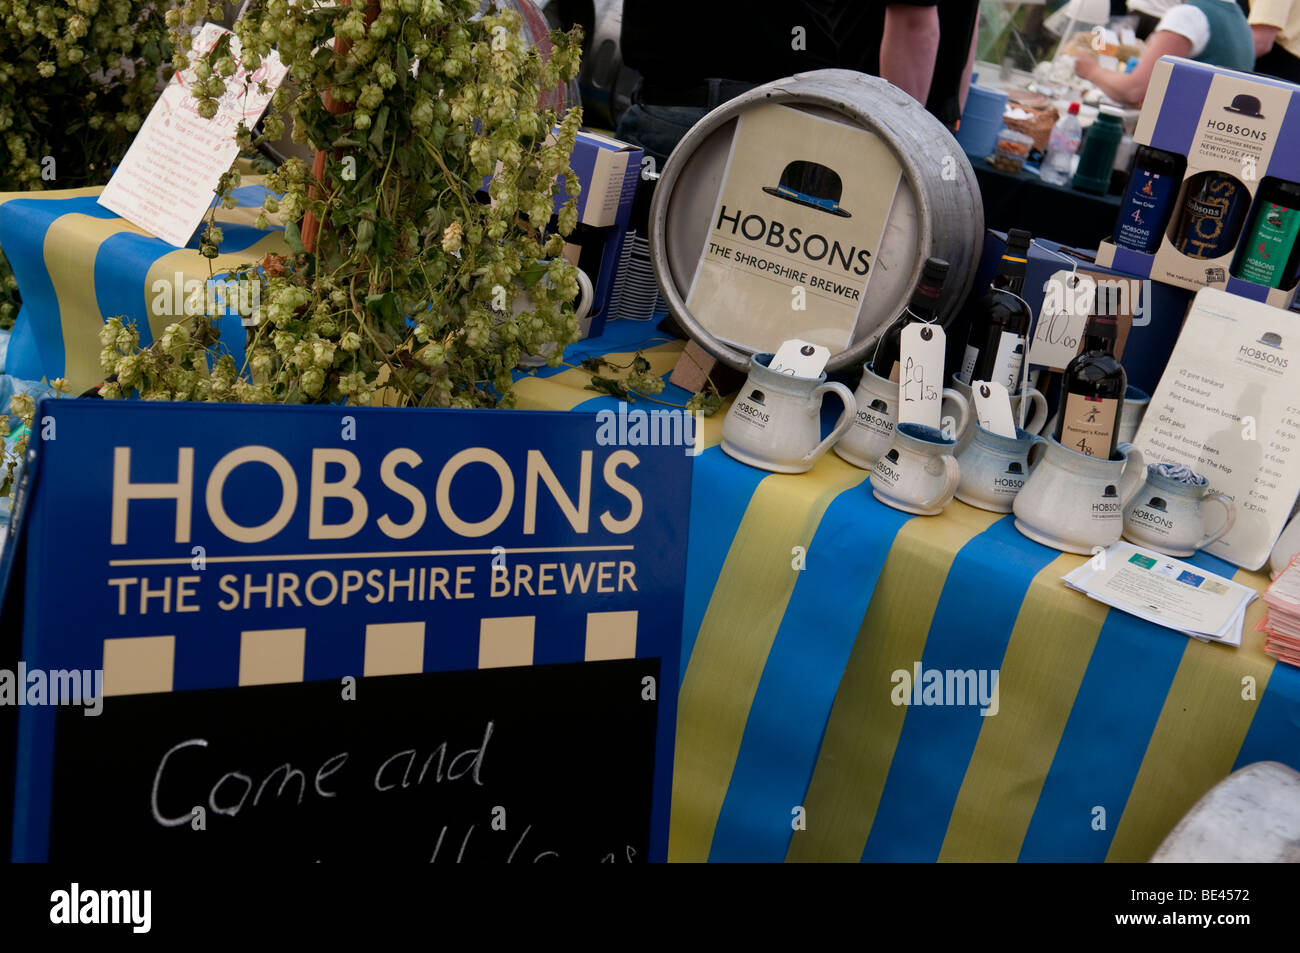 Hobson's beer stand at Ludlow Food Festival, Shropshire, England UK Stock Photo